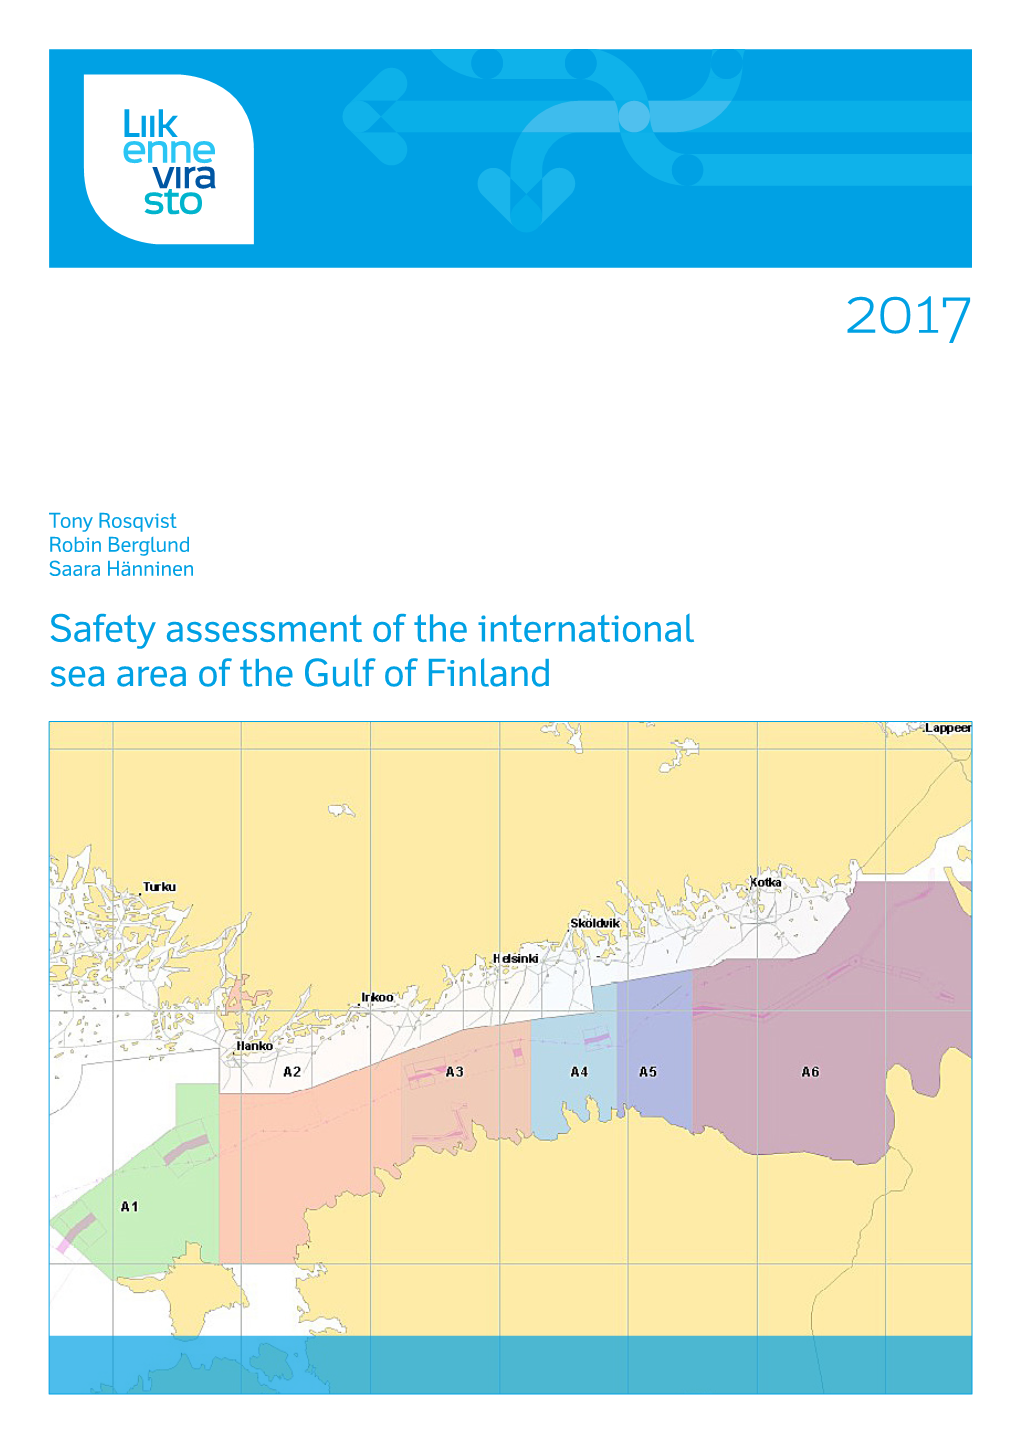 Safety Assessment of the International Sea Area of the Gulf of Finland